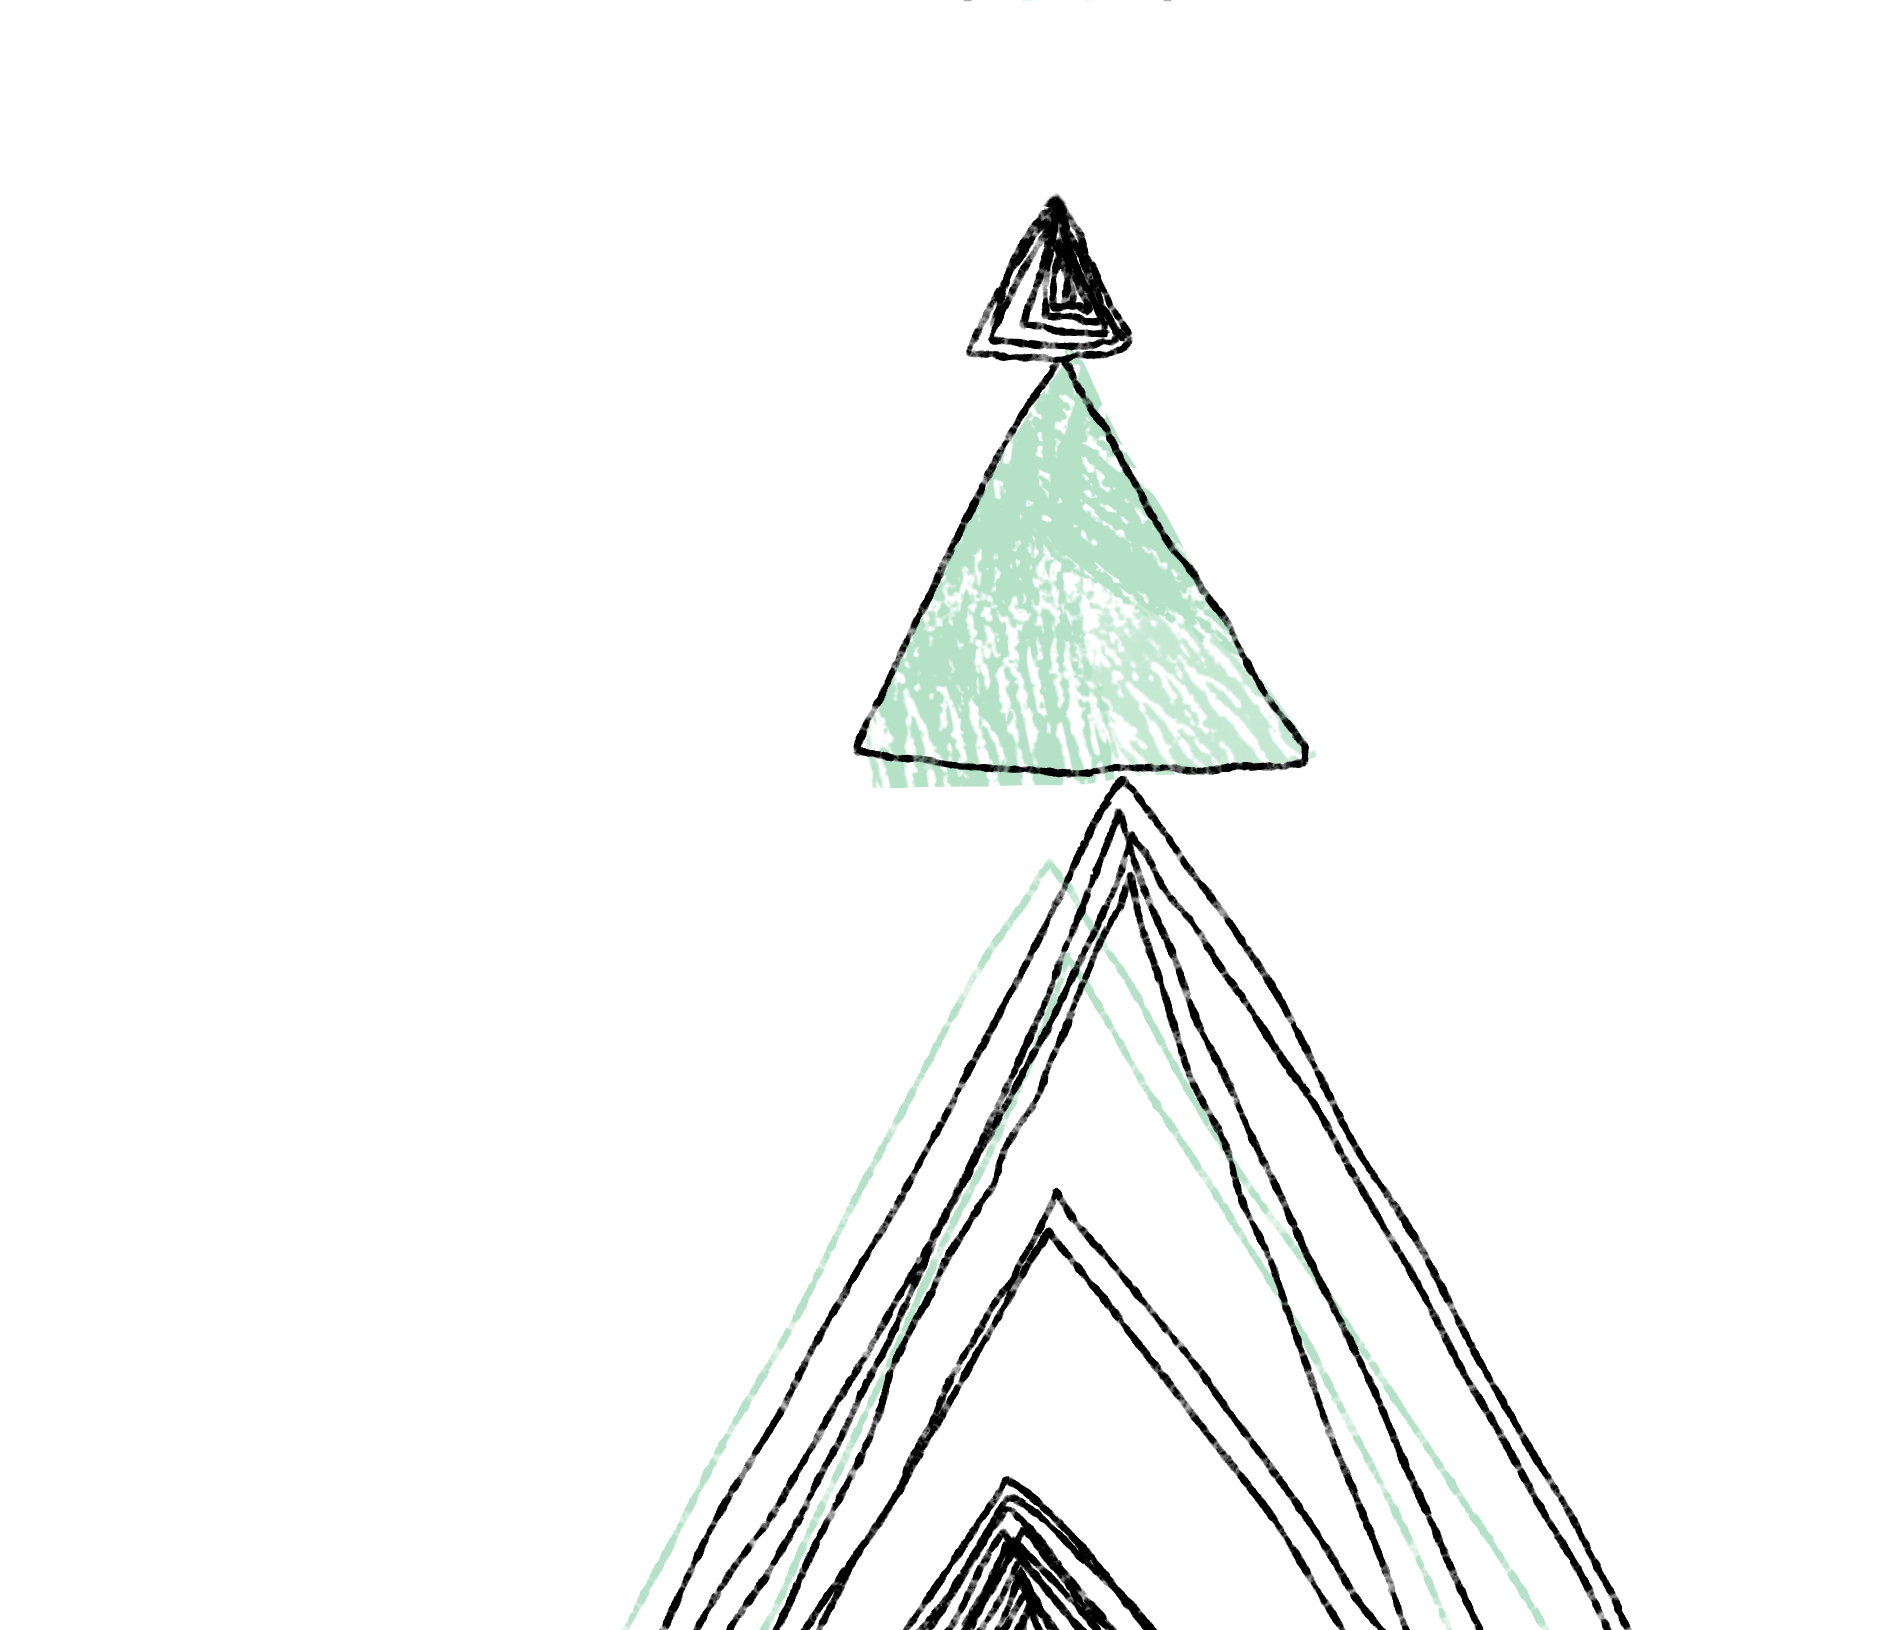 Stacked triangle illustration with color pop